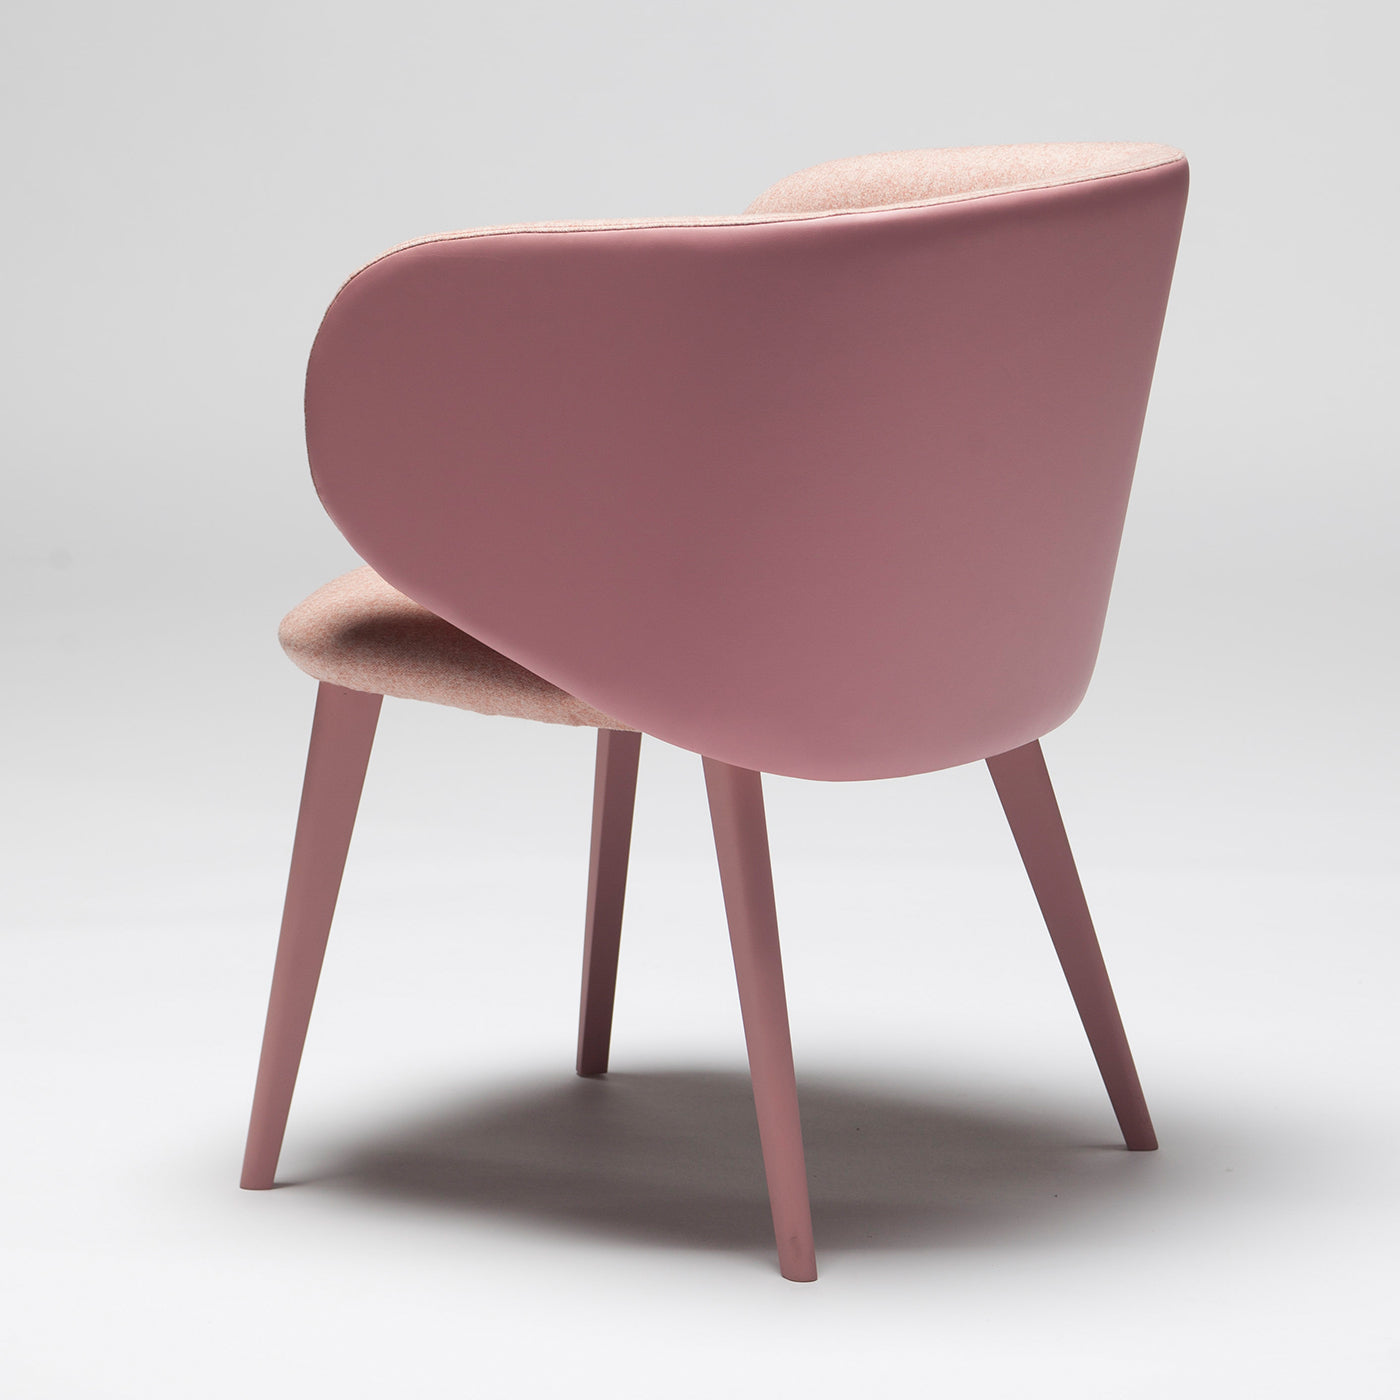 Caura 080 Pink Chair by Vicent Clausell - Alternative view 1